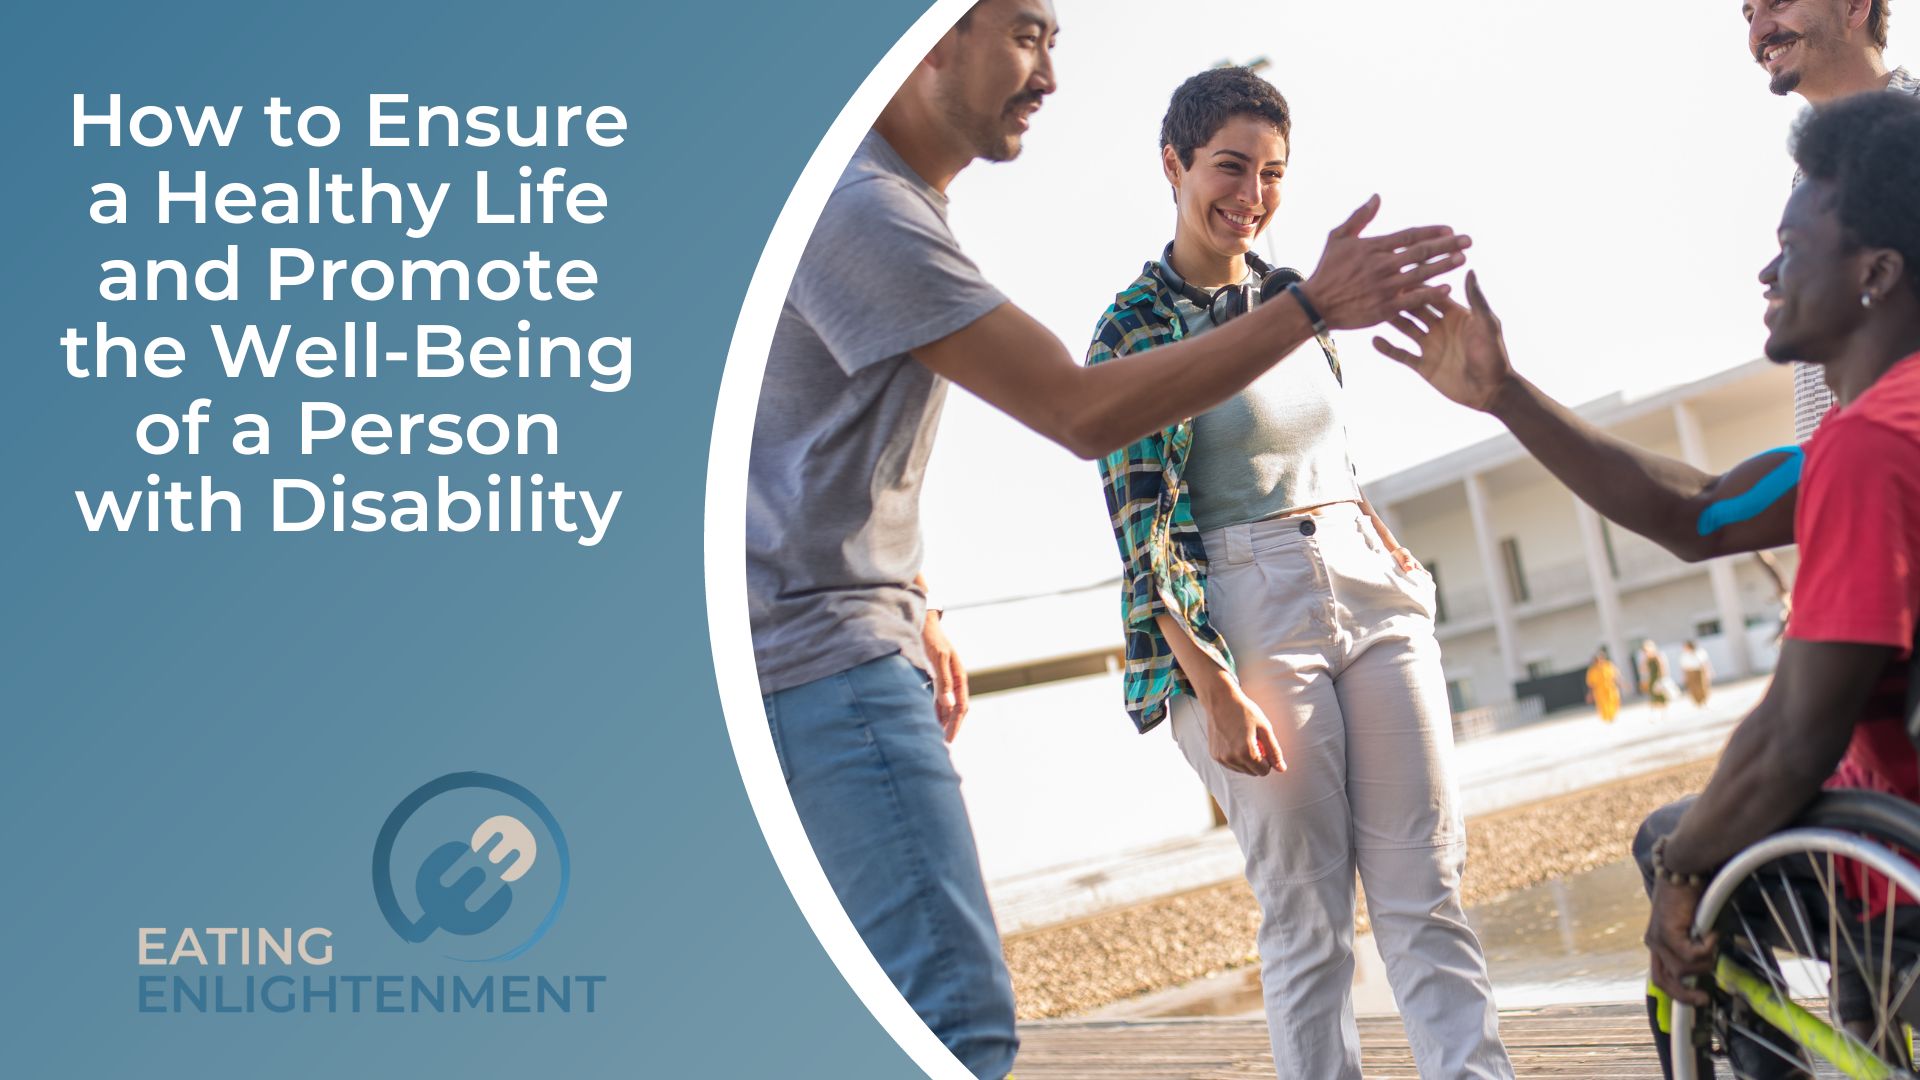 How to Ensure a Healthy Life and Promote the Well-Being of a Person with Disability